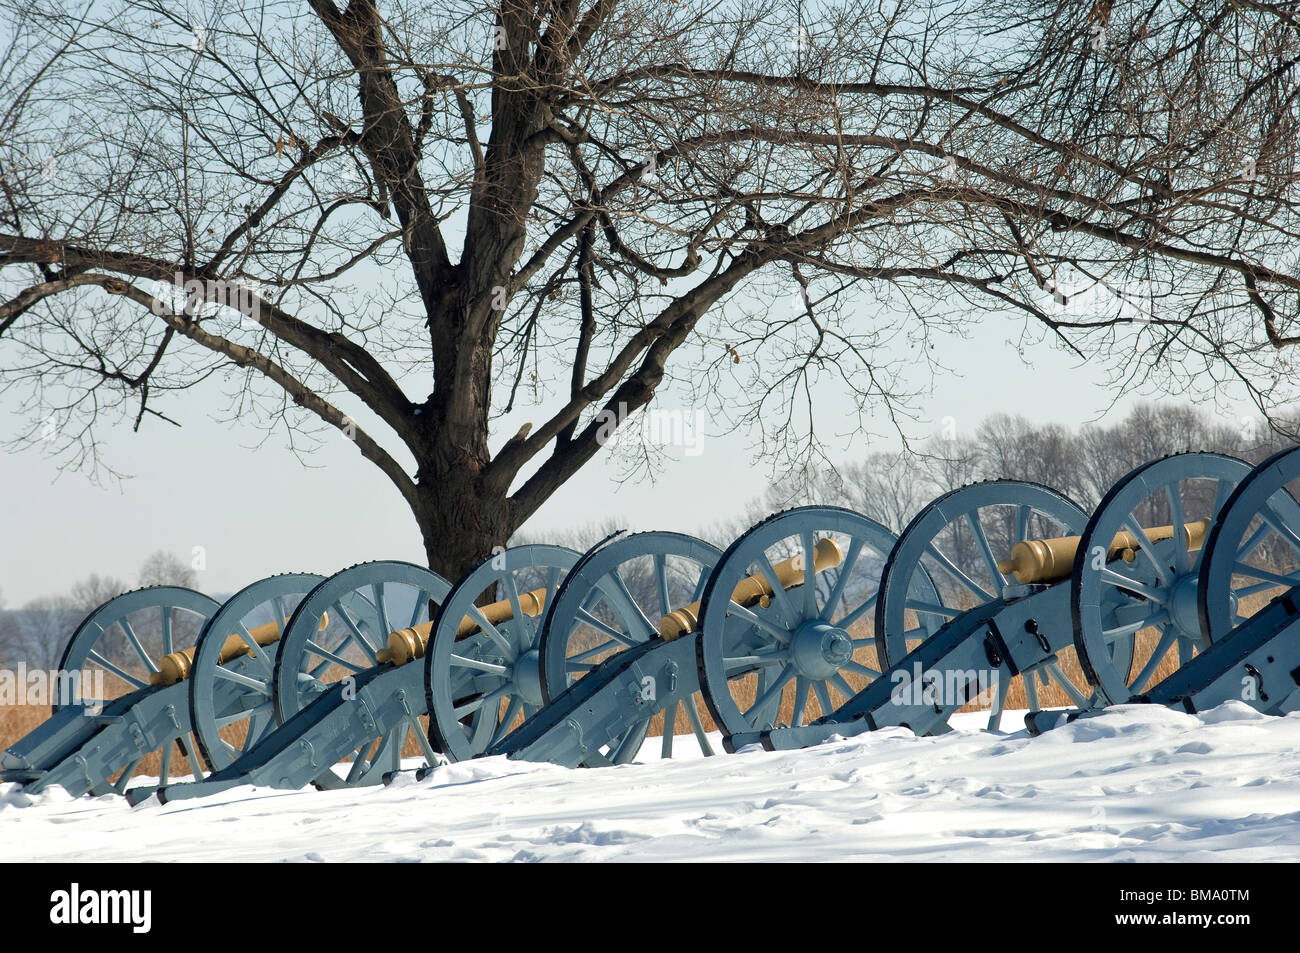 Artillery defending the Continental Army winter camp at Valley Forge, Pennsylvania. Digital photograph Stock Photo